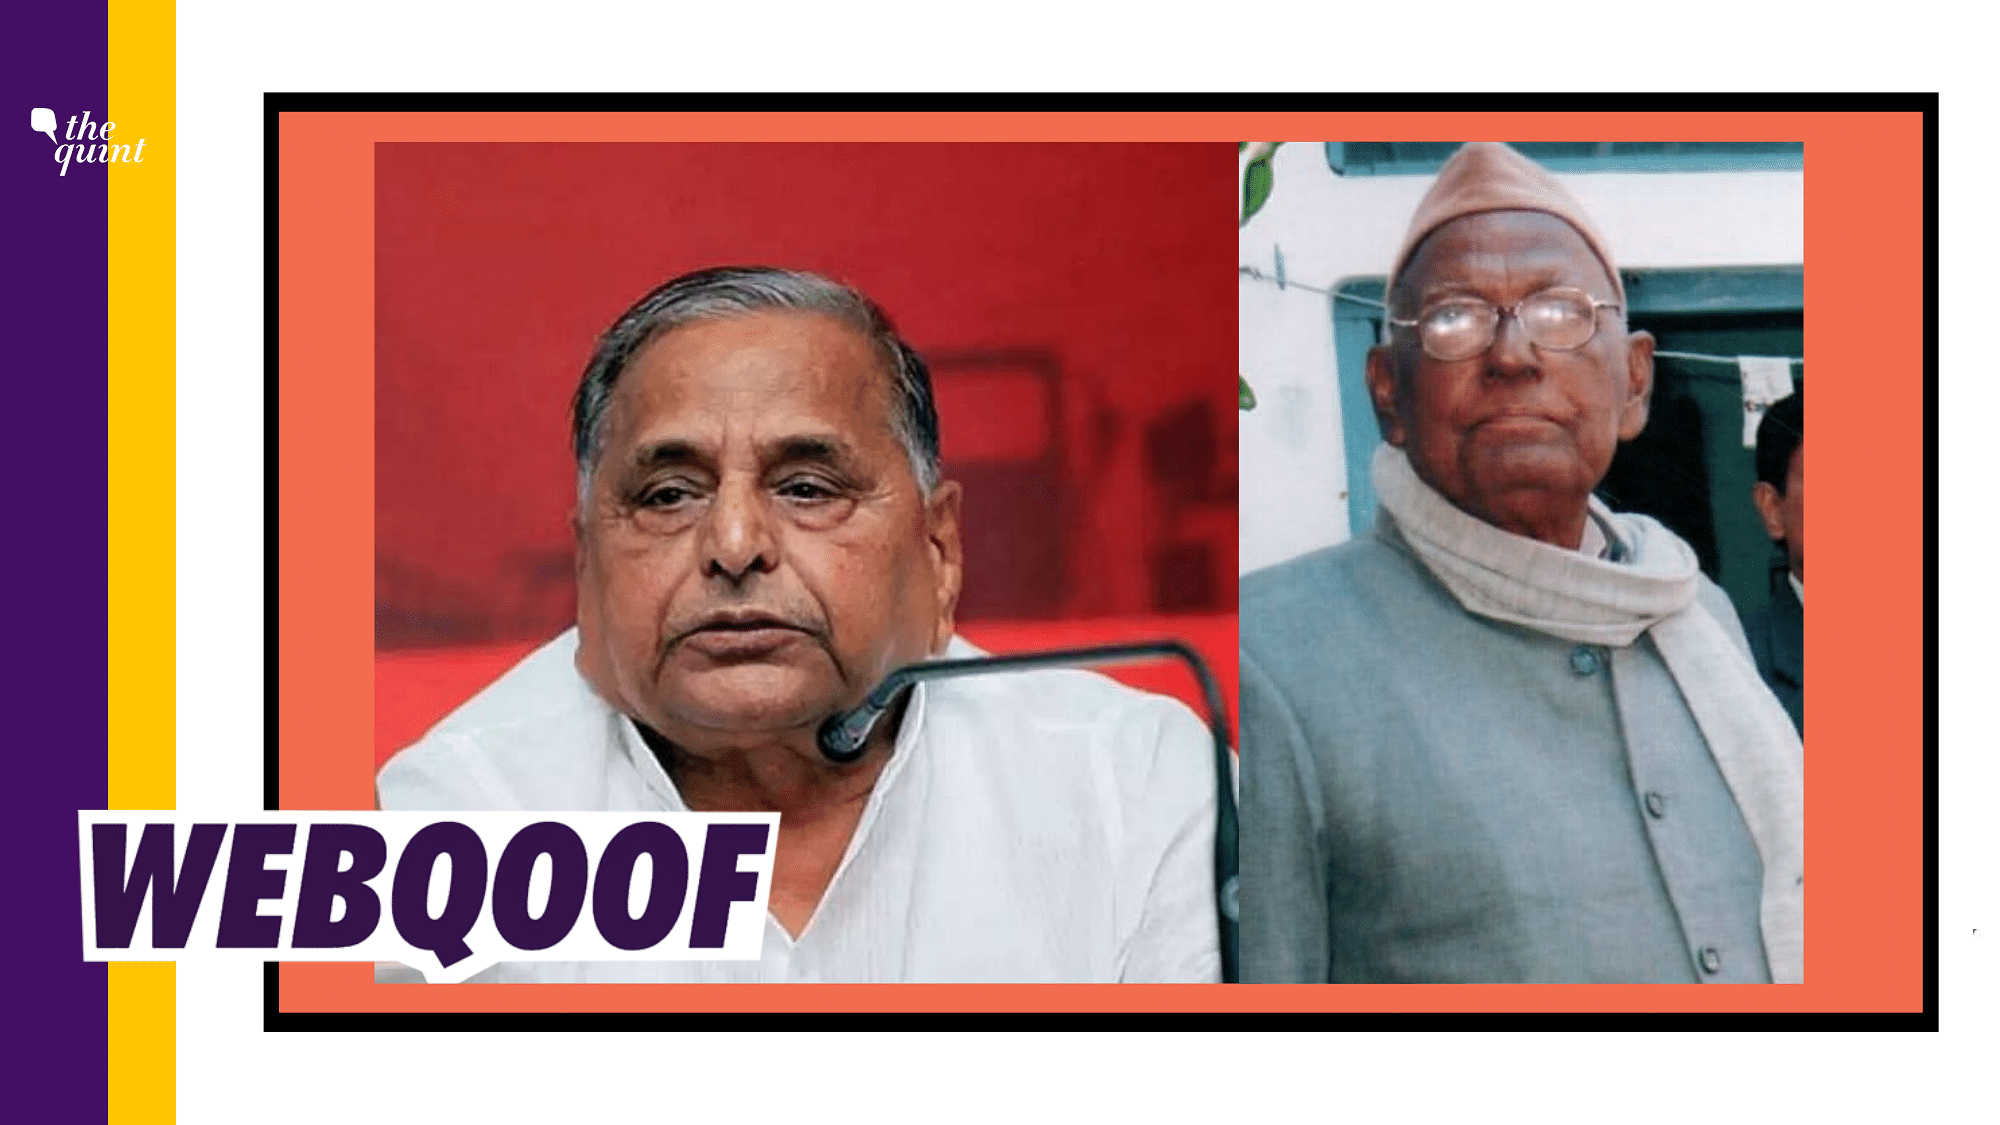 Social media users confused the MLC with his namesake, Mulayam Singh Yadav, SP’s founder and former chief minister of UP.